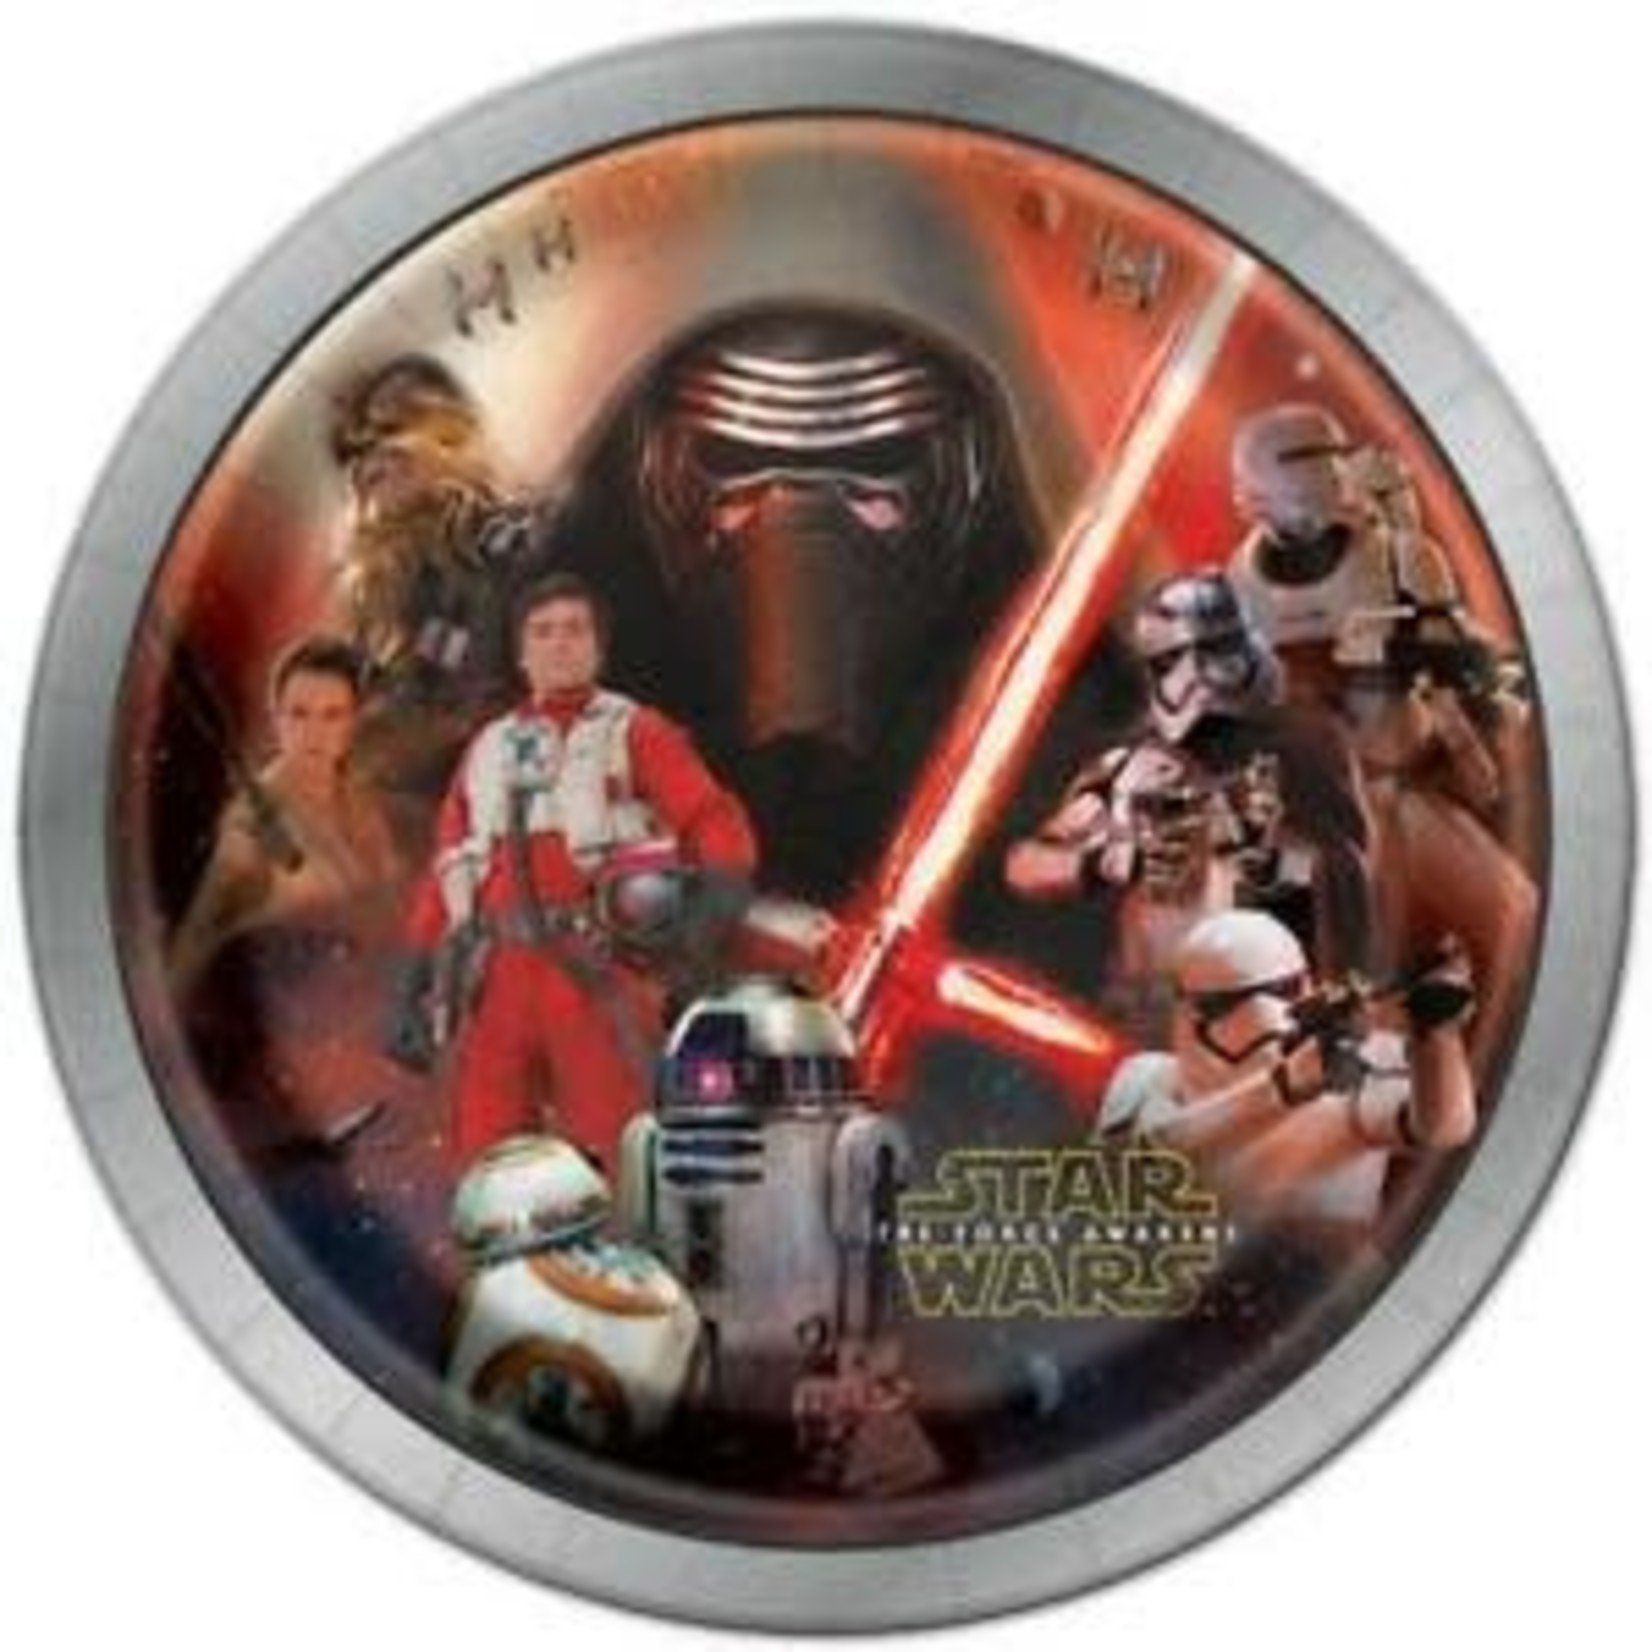 Star Wars The Force Awakens Plates